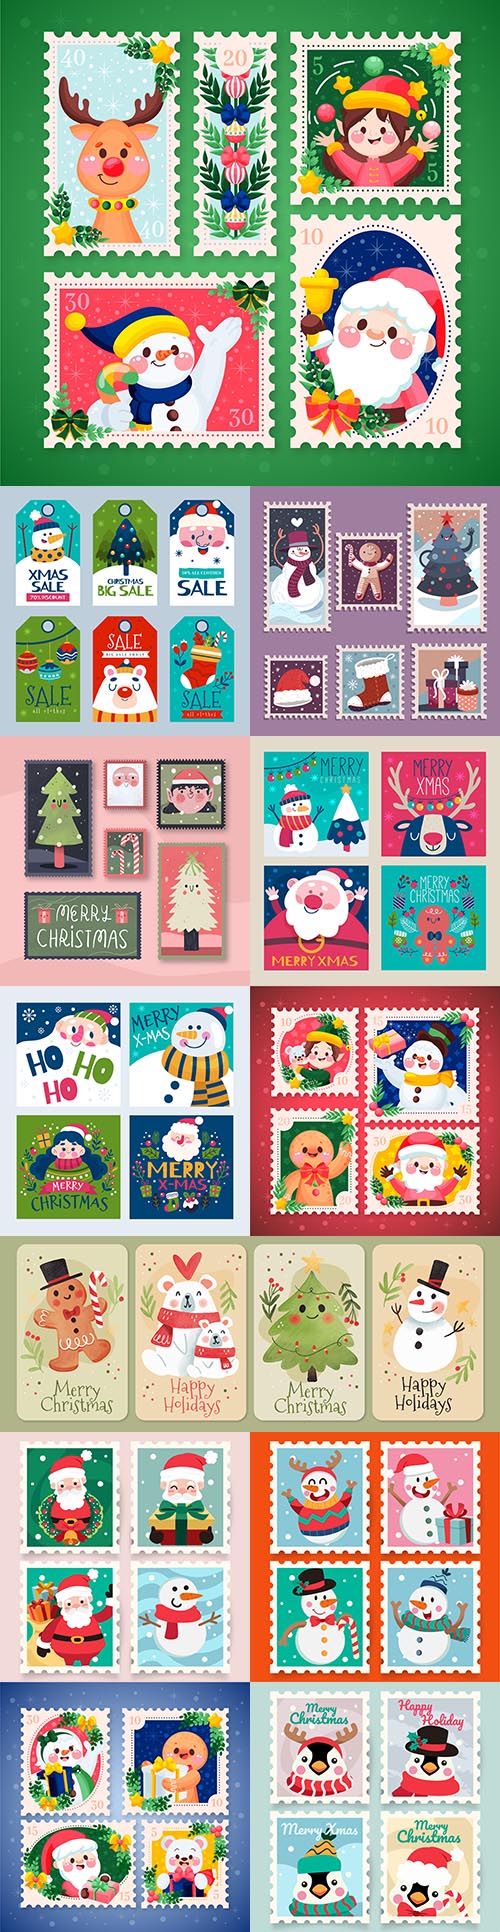 Christmas stamps and postcards flat design collection painted 4
